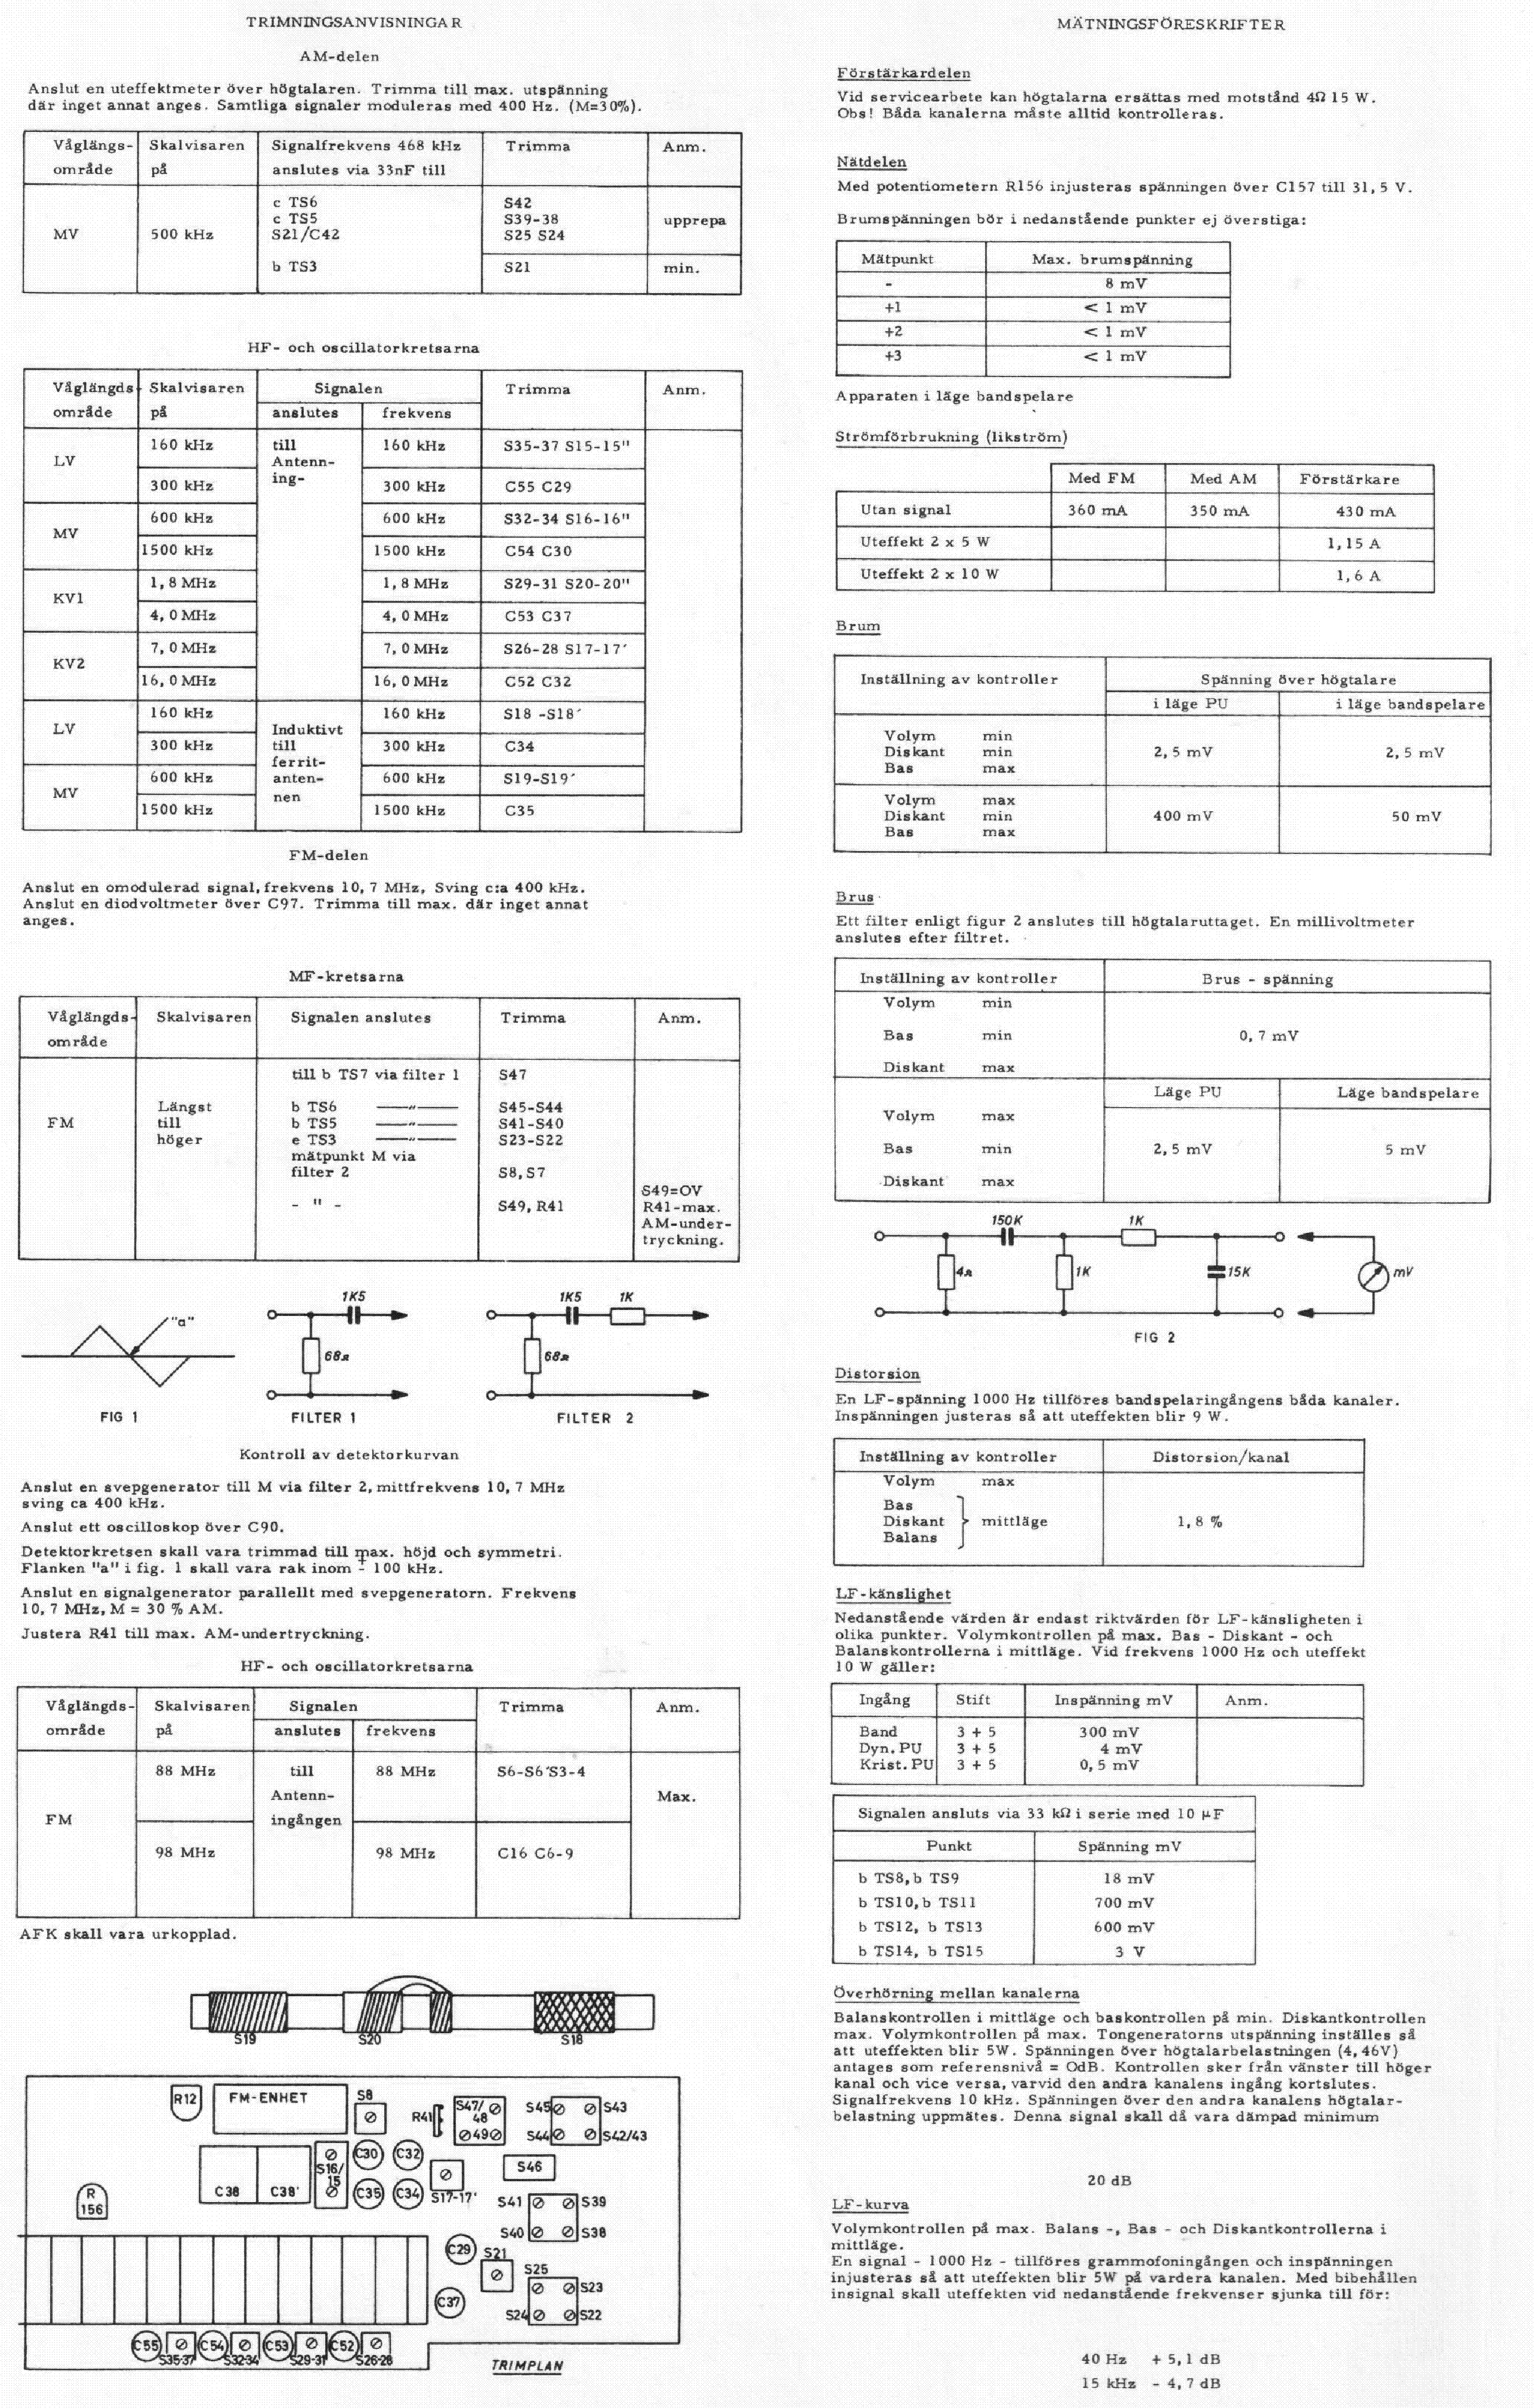 PHILIPS ZU3A RECEIVER SM service manual (2nd page)